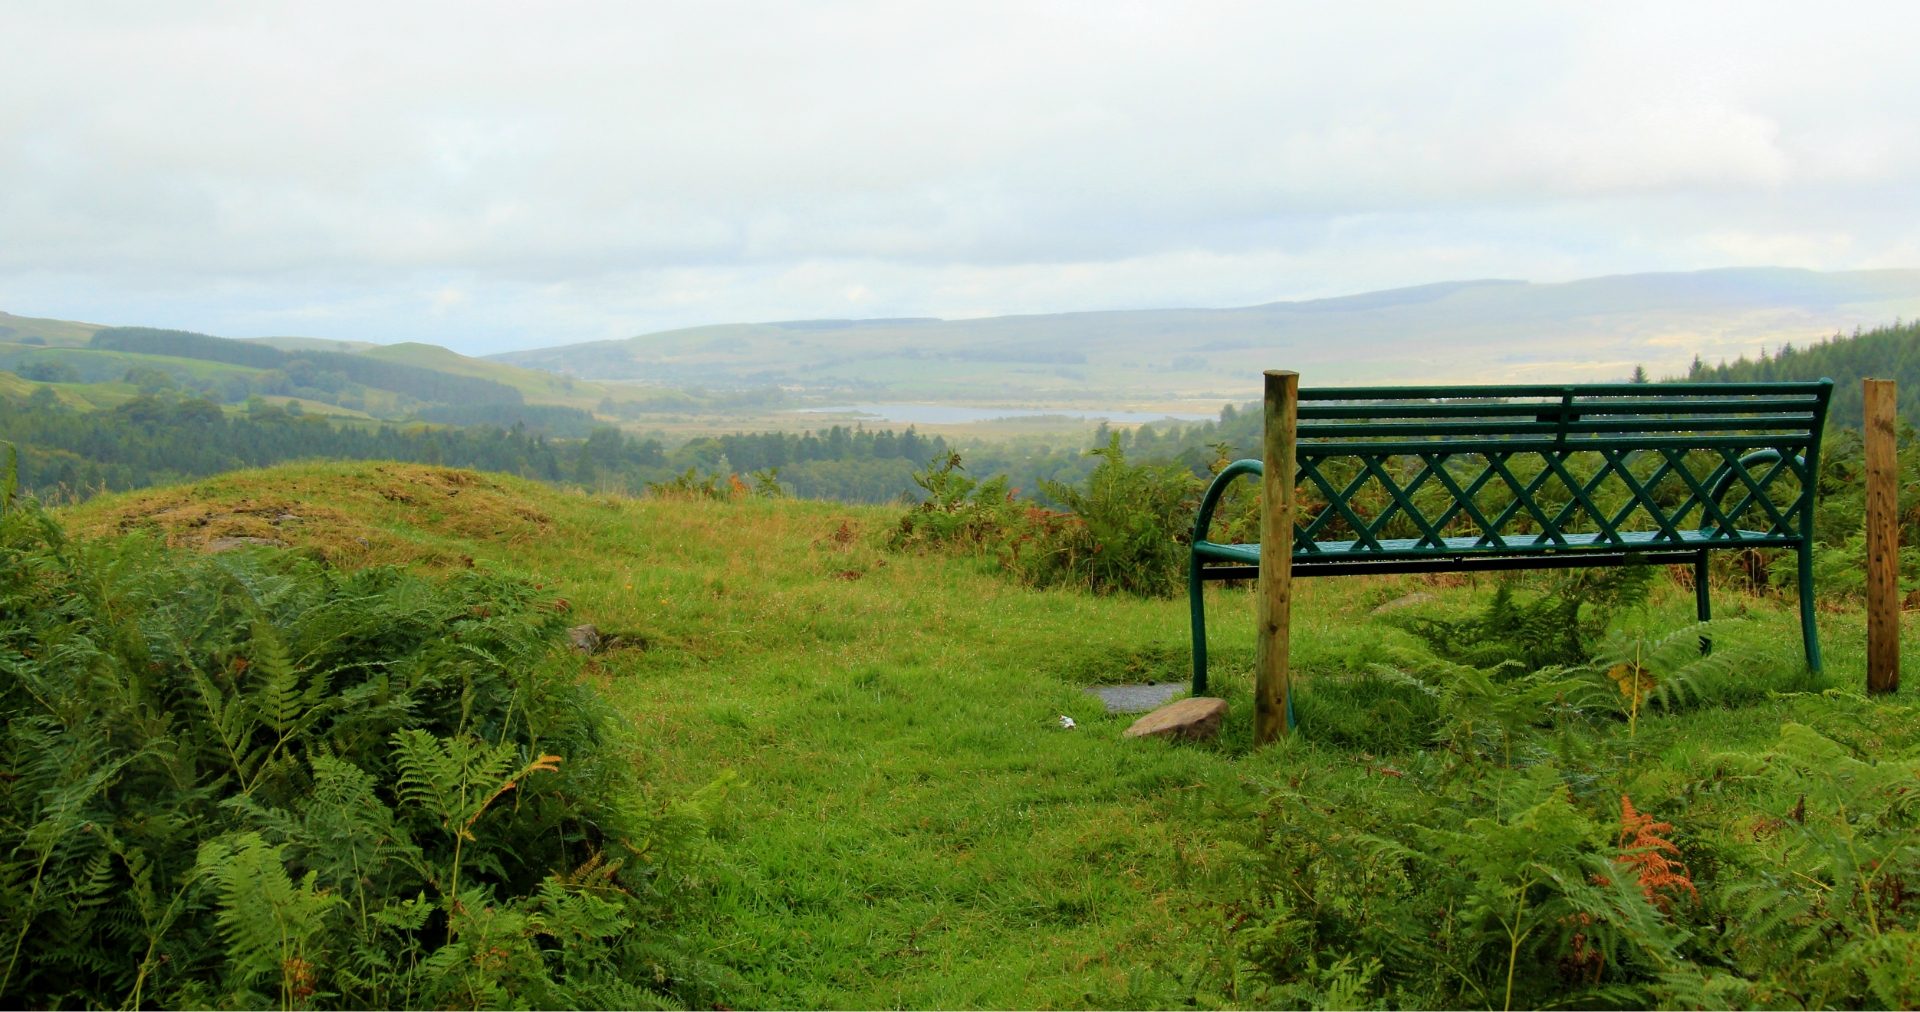 bench on hill overlooking a scenic view of trees, water and hills